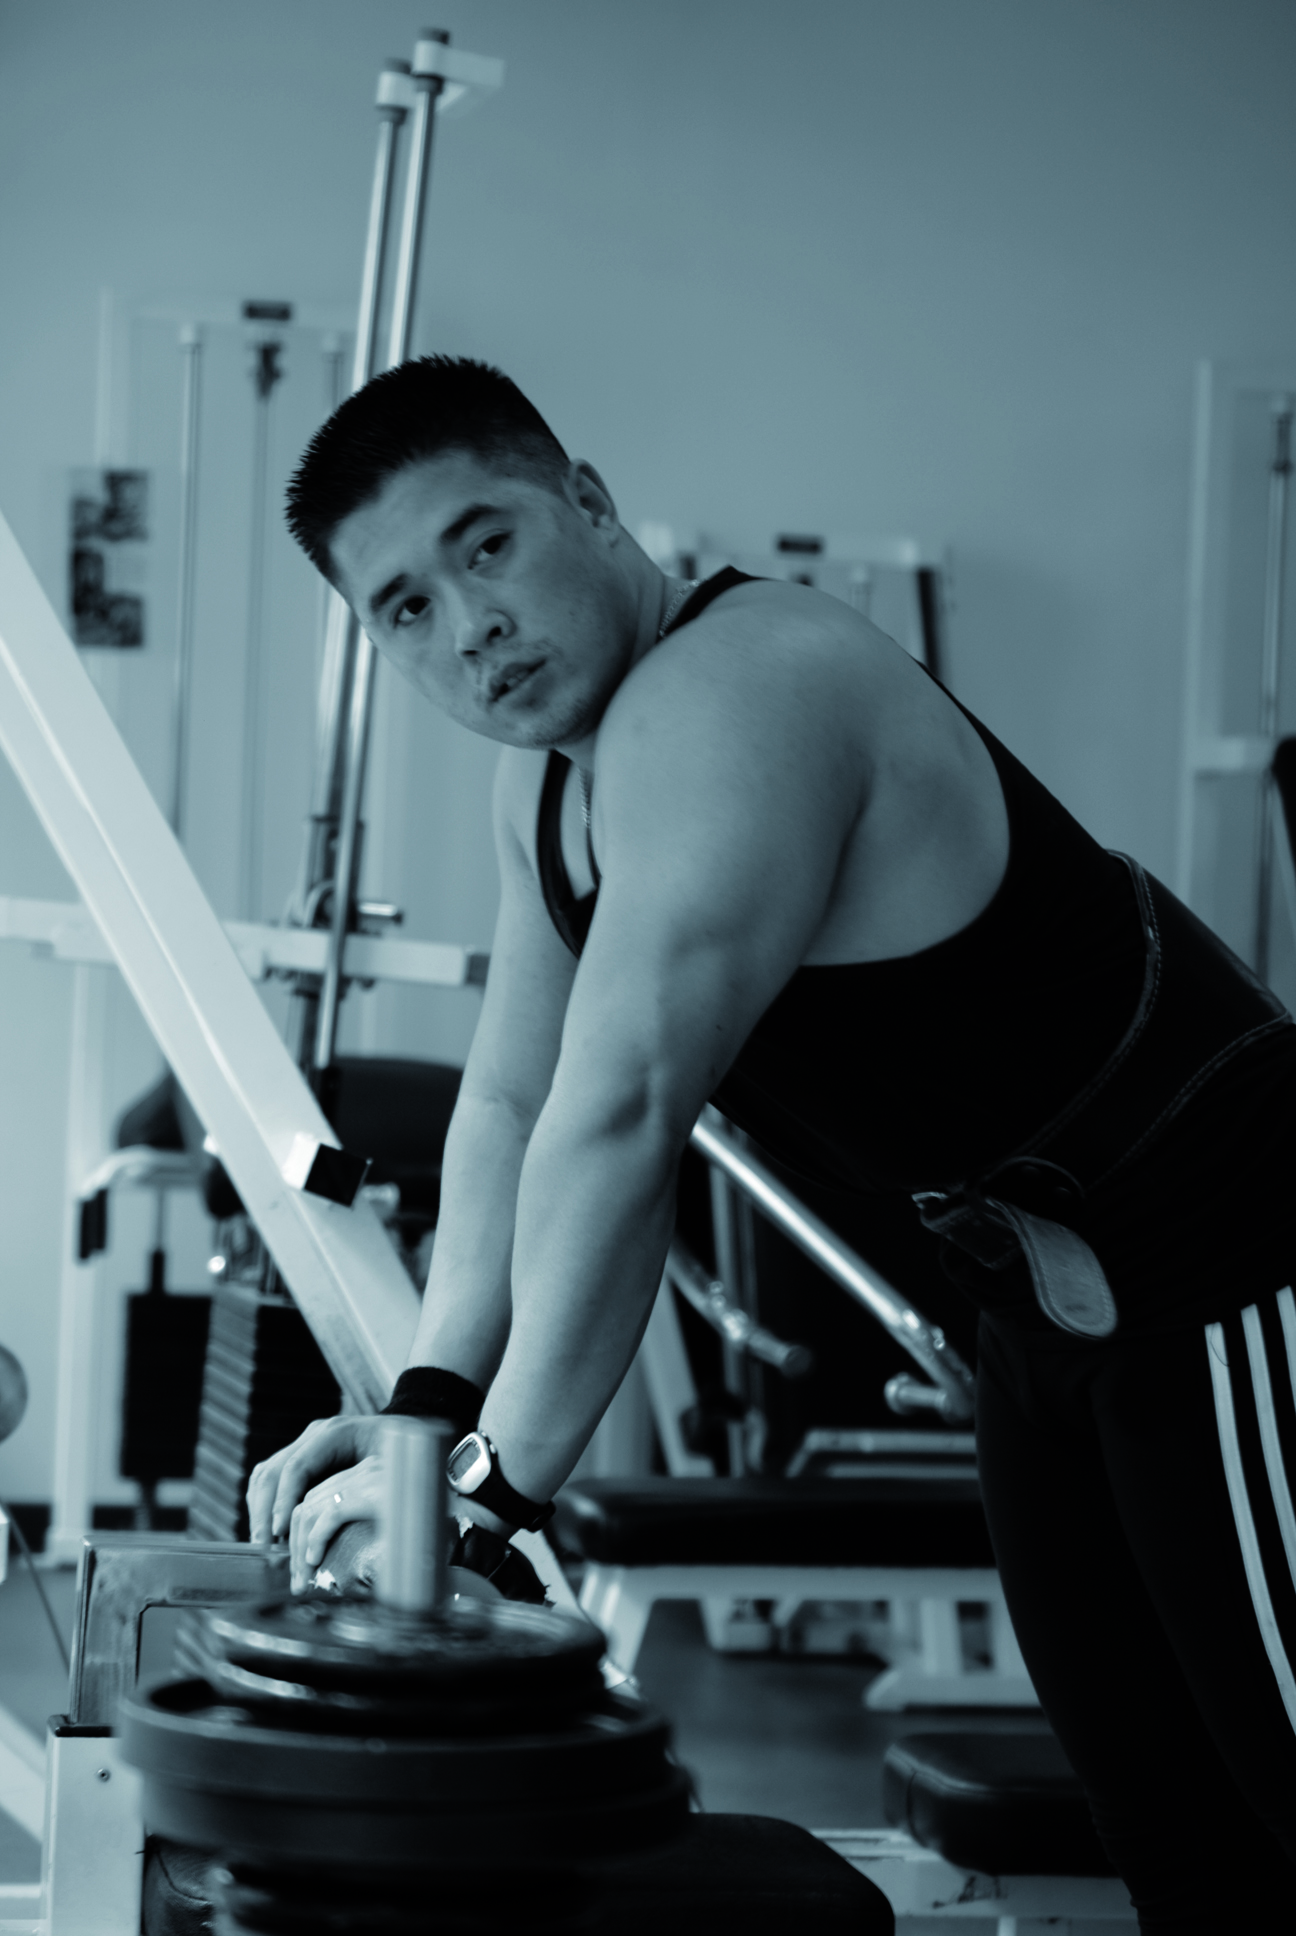 Asian man at the gym, Asian, Asiatic, Fitness, Gym, HQ Photo